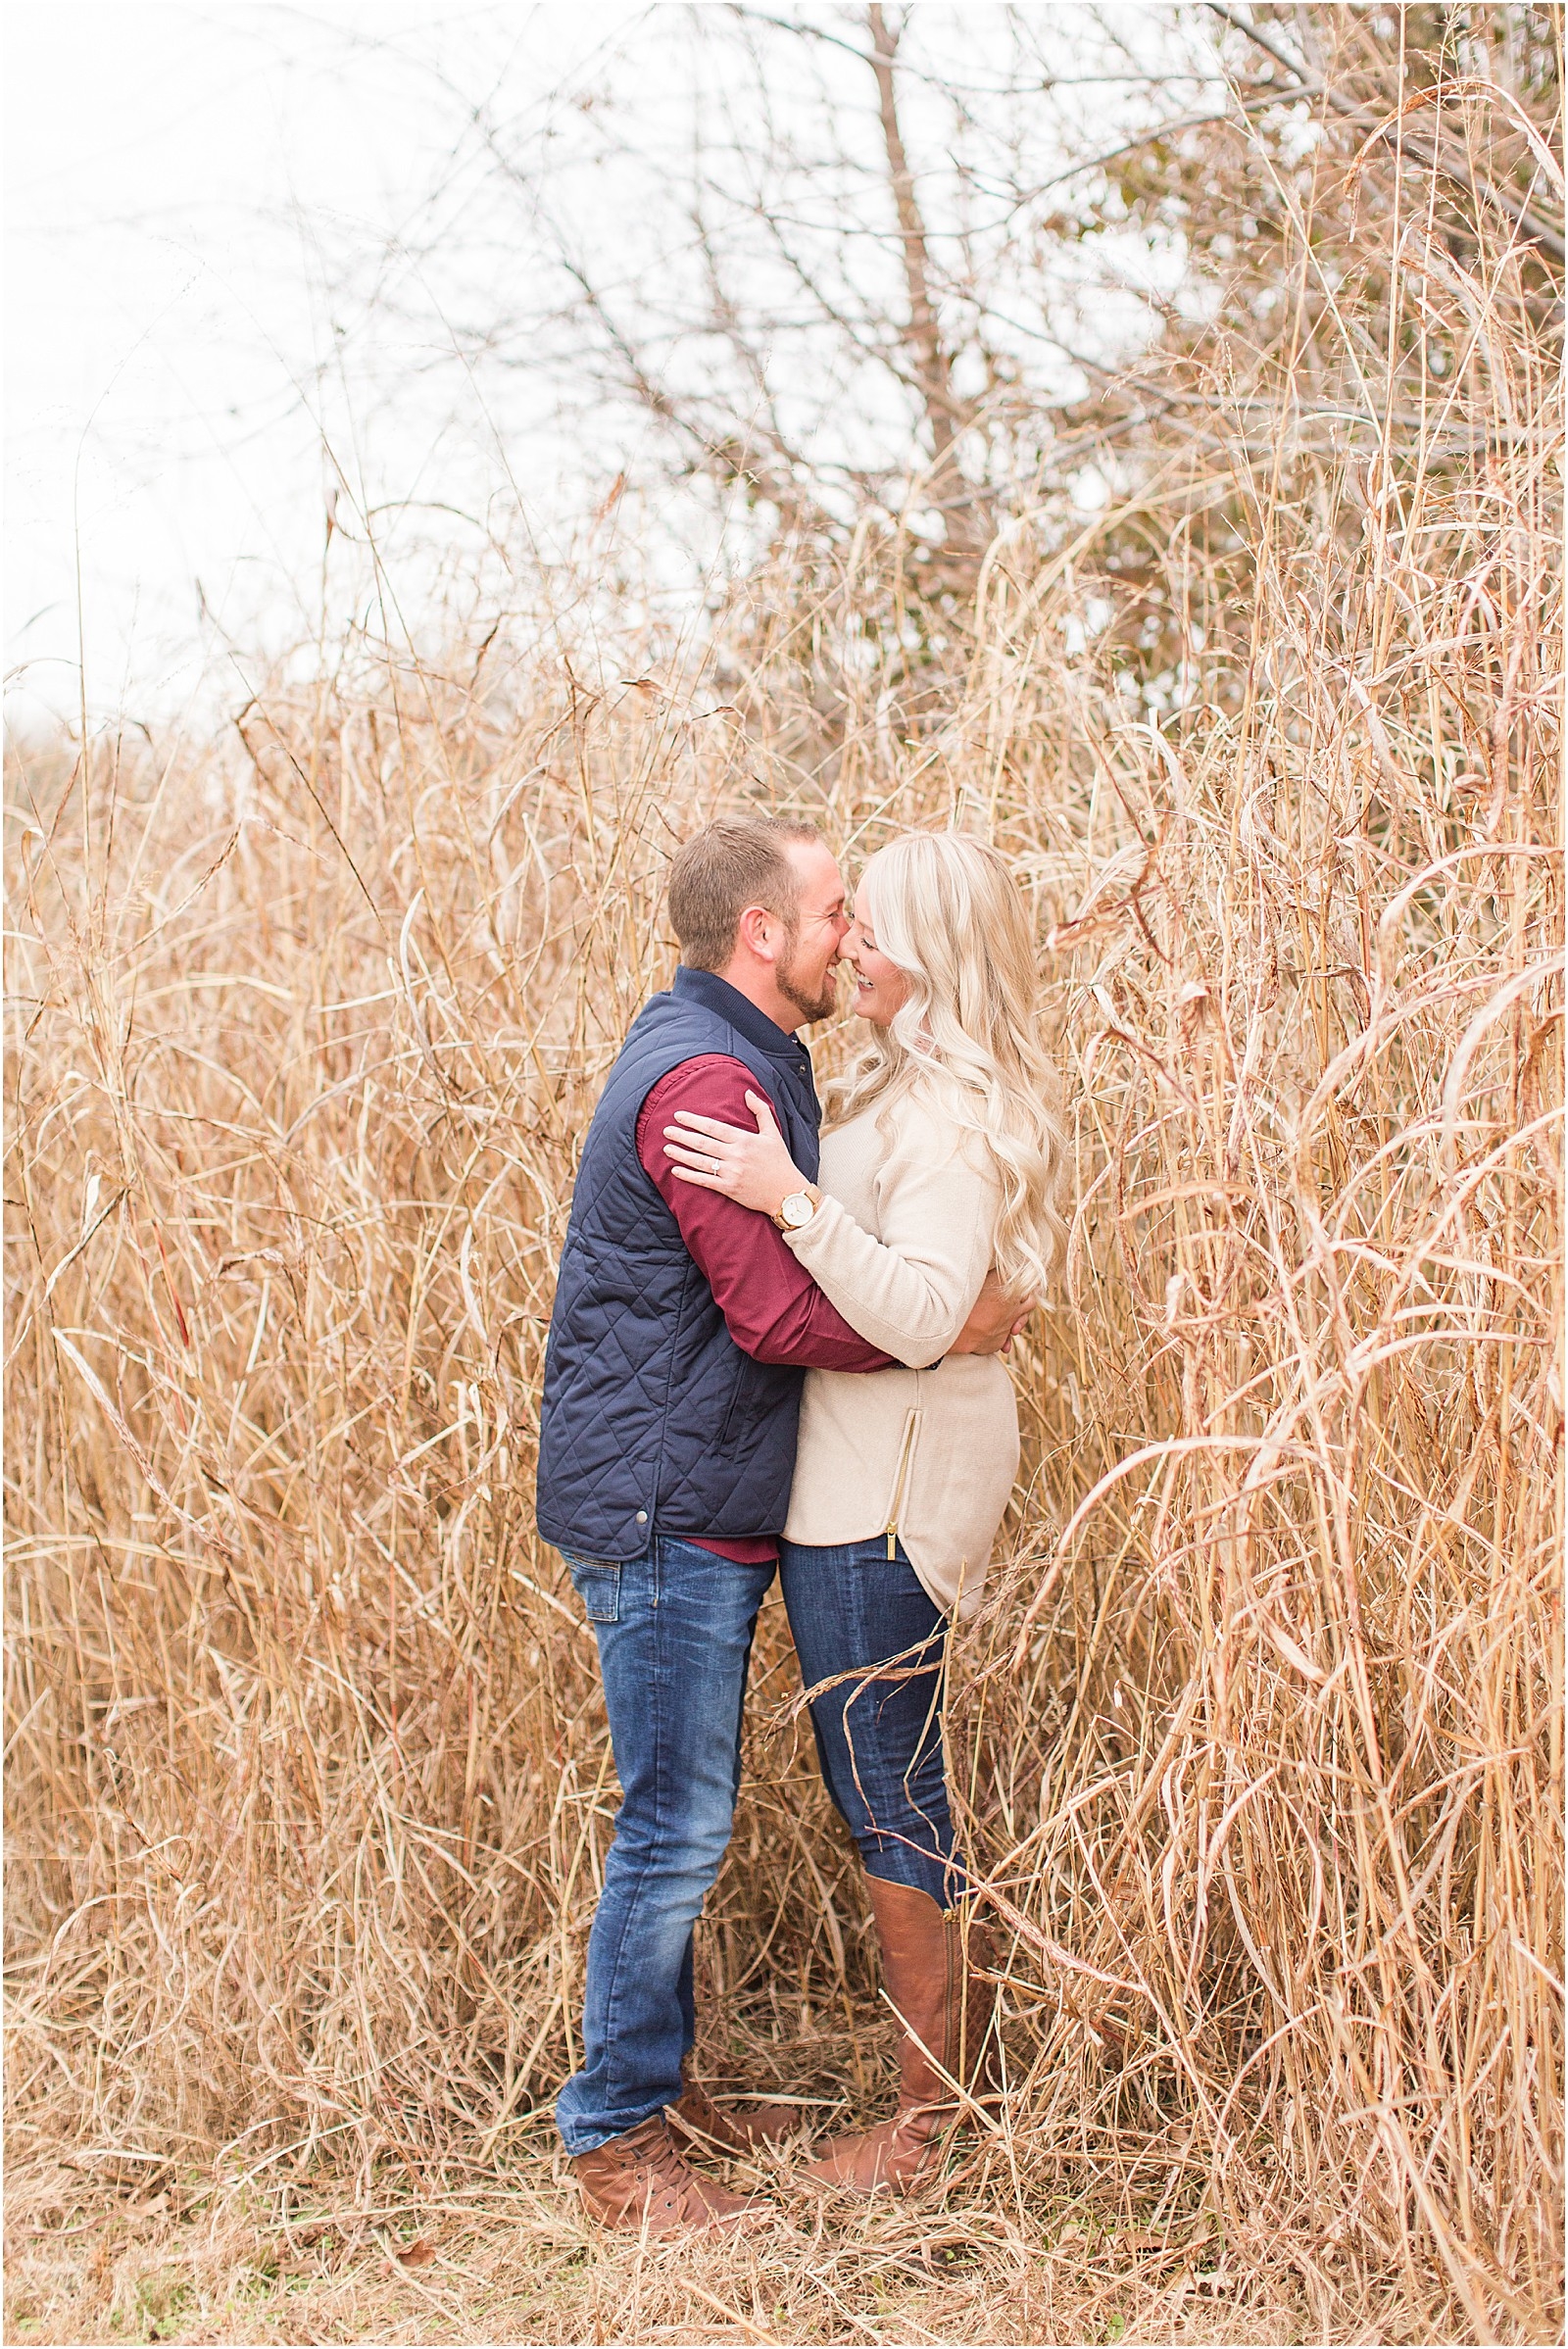 A Perfect Fall Engagement Session at Evansville State Park | Jamie and Max | Bret and Brandie Photography 006.jpg